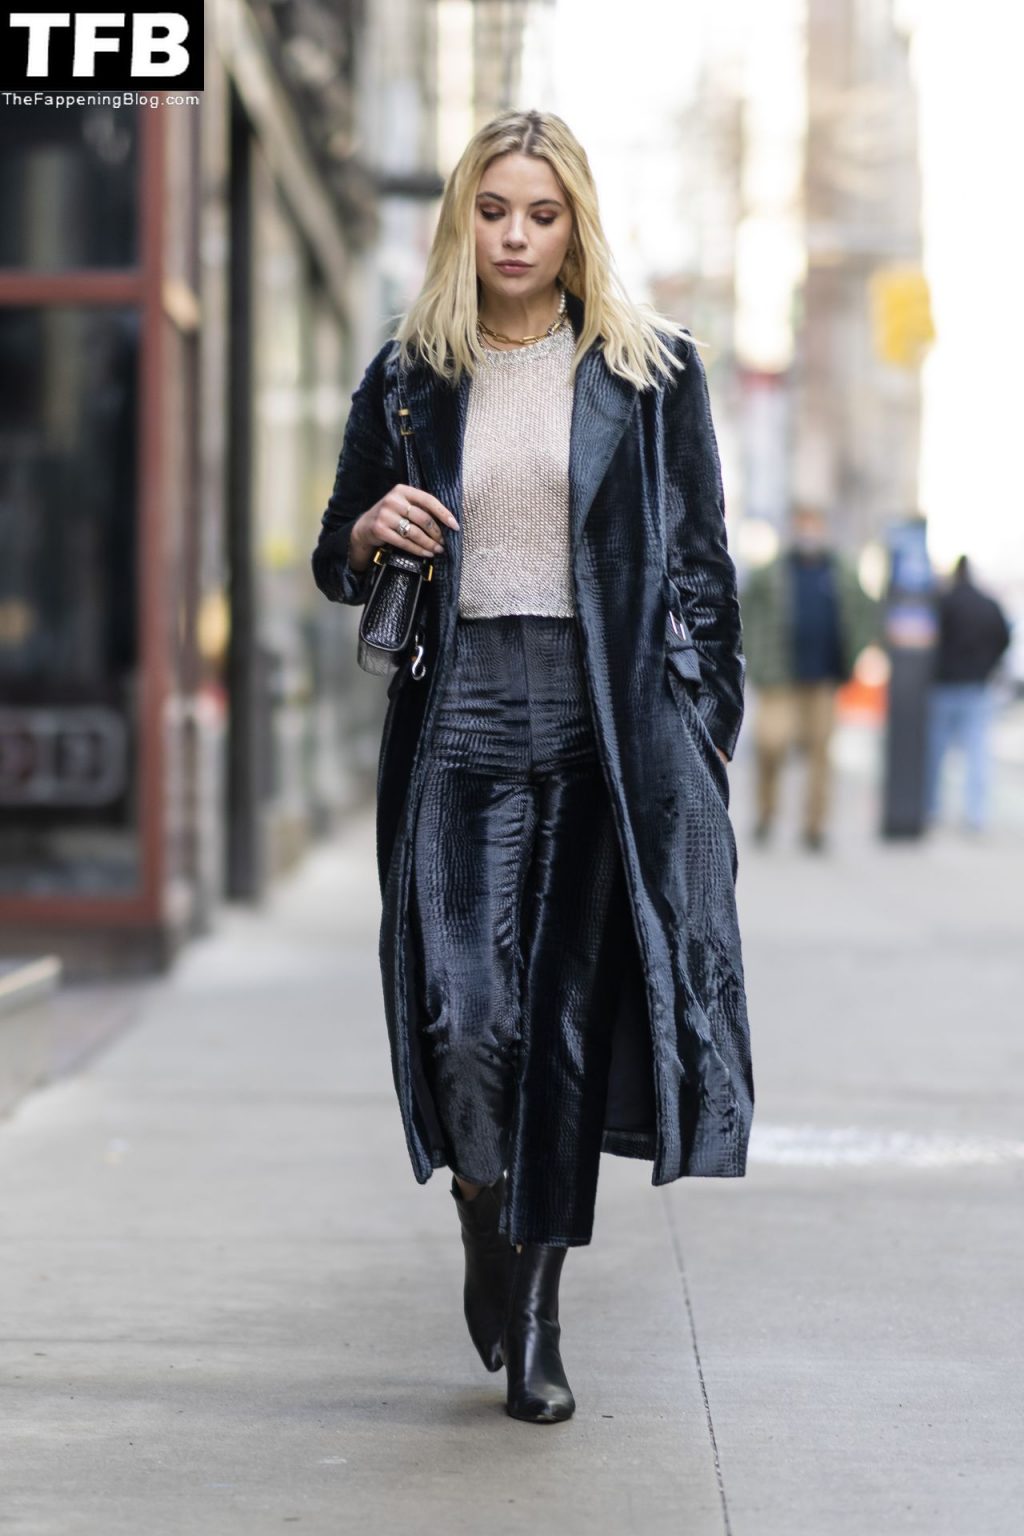 Ashley Benson Sexy The Fappening Blog 9 1024x1536 - Braless Ashley Benson Looks Stylish While Heading to a Meeting in NYC (20 Photos)